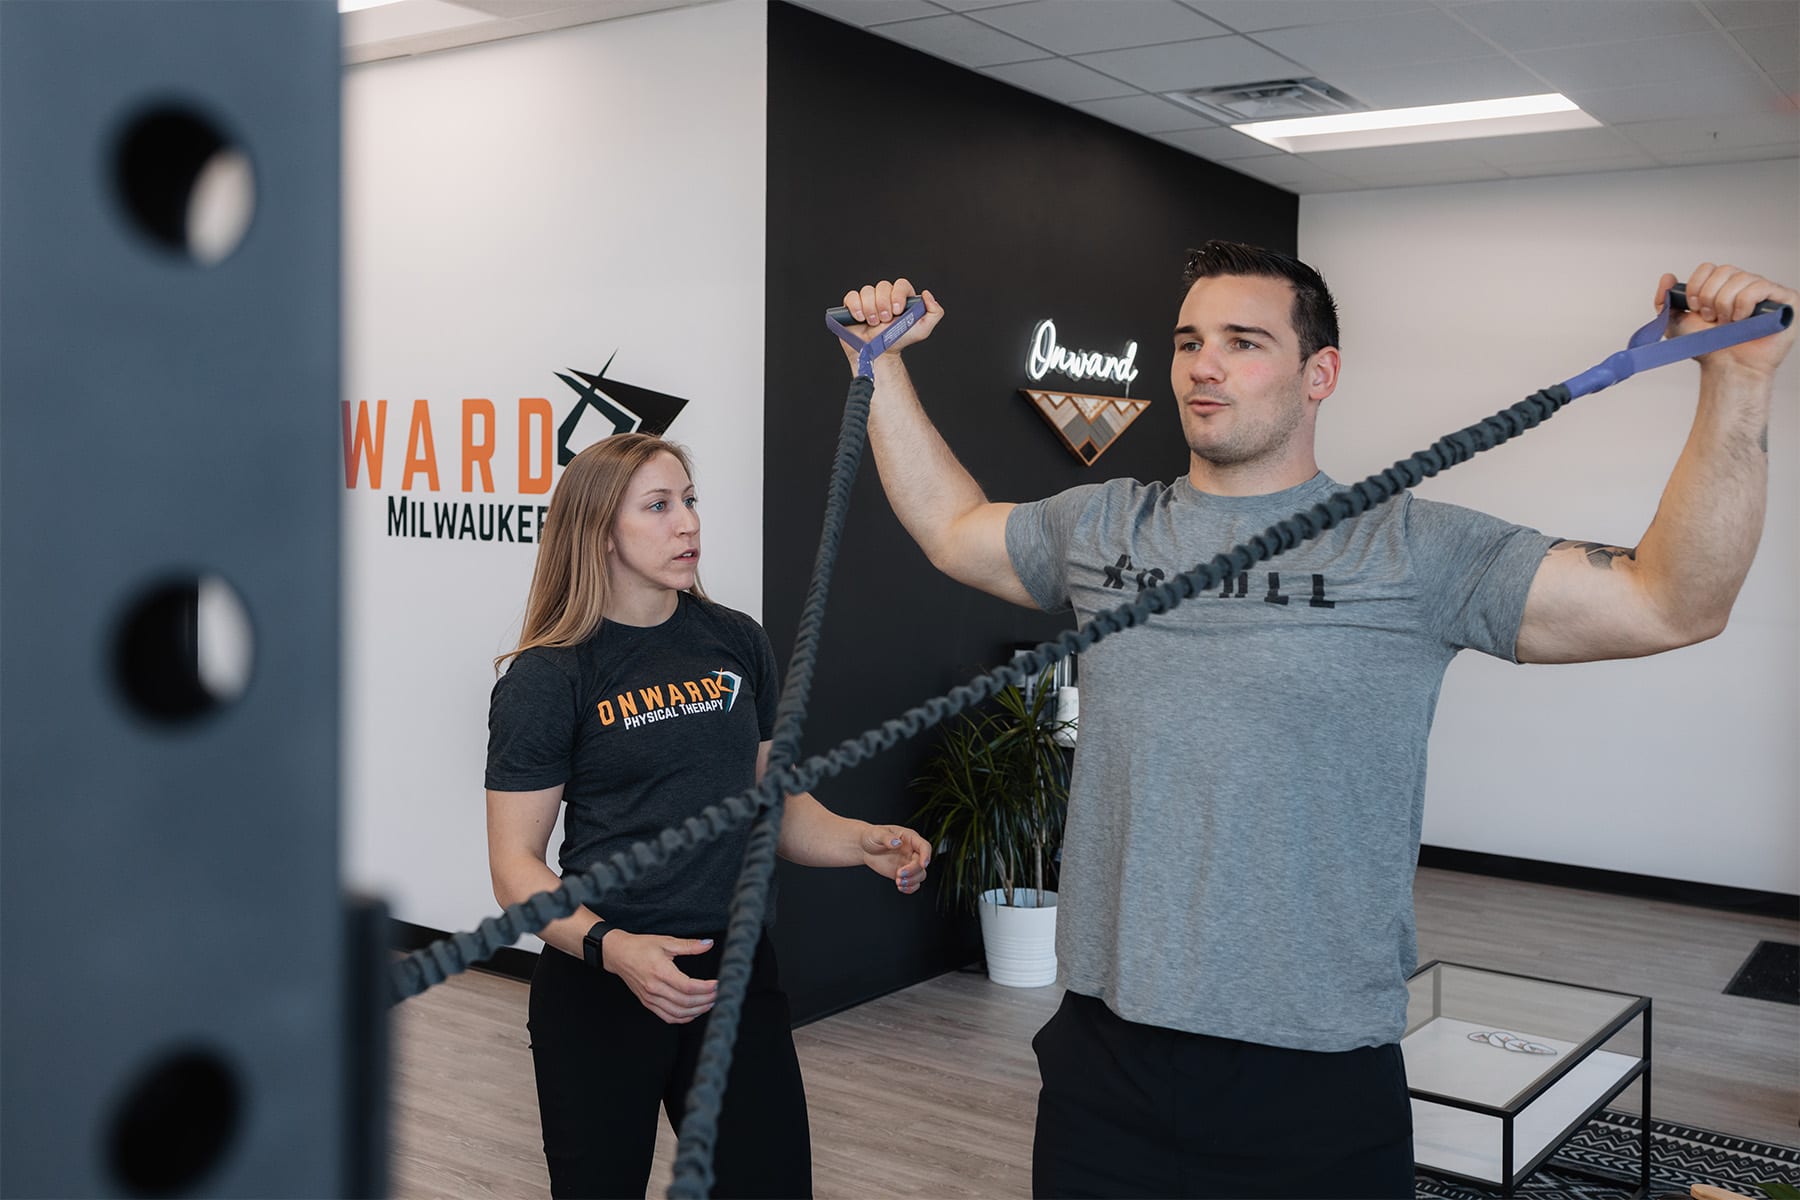 Fitness Programming | Onward Physical Therapy